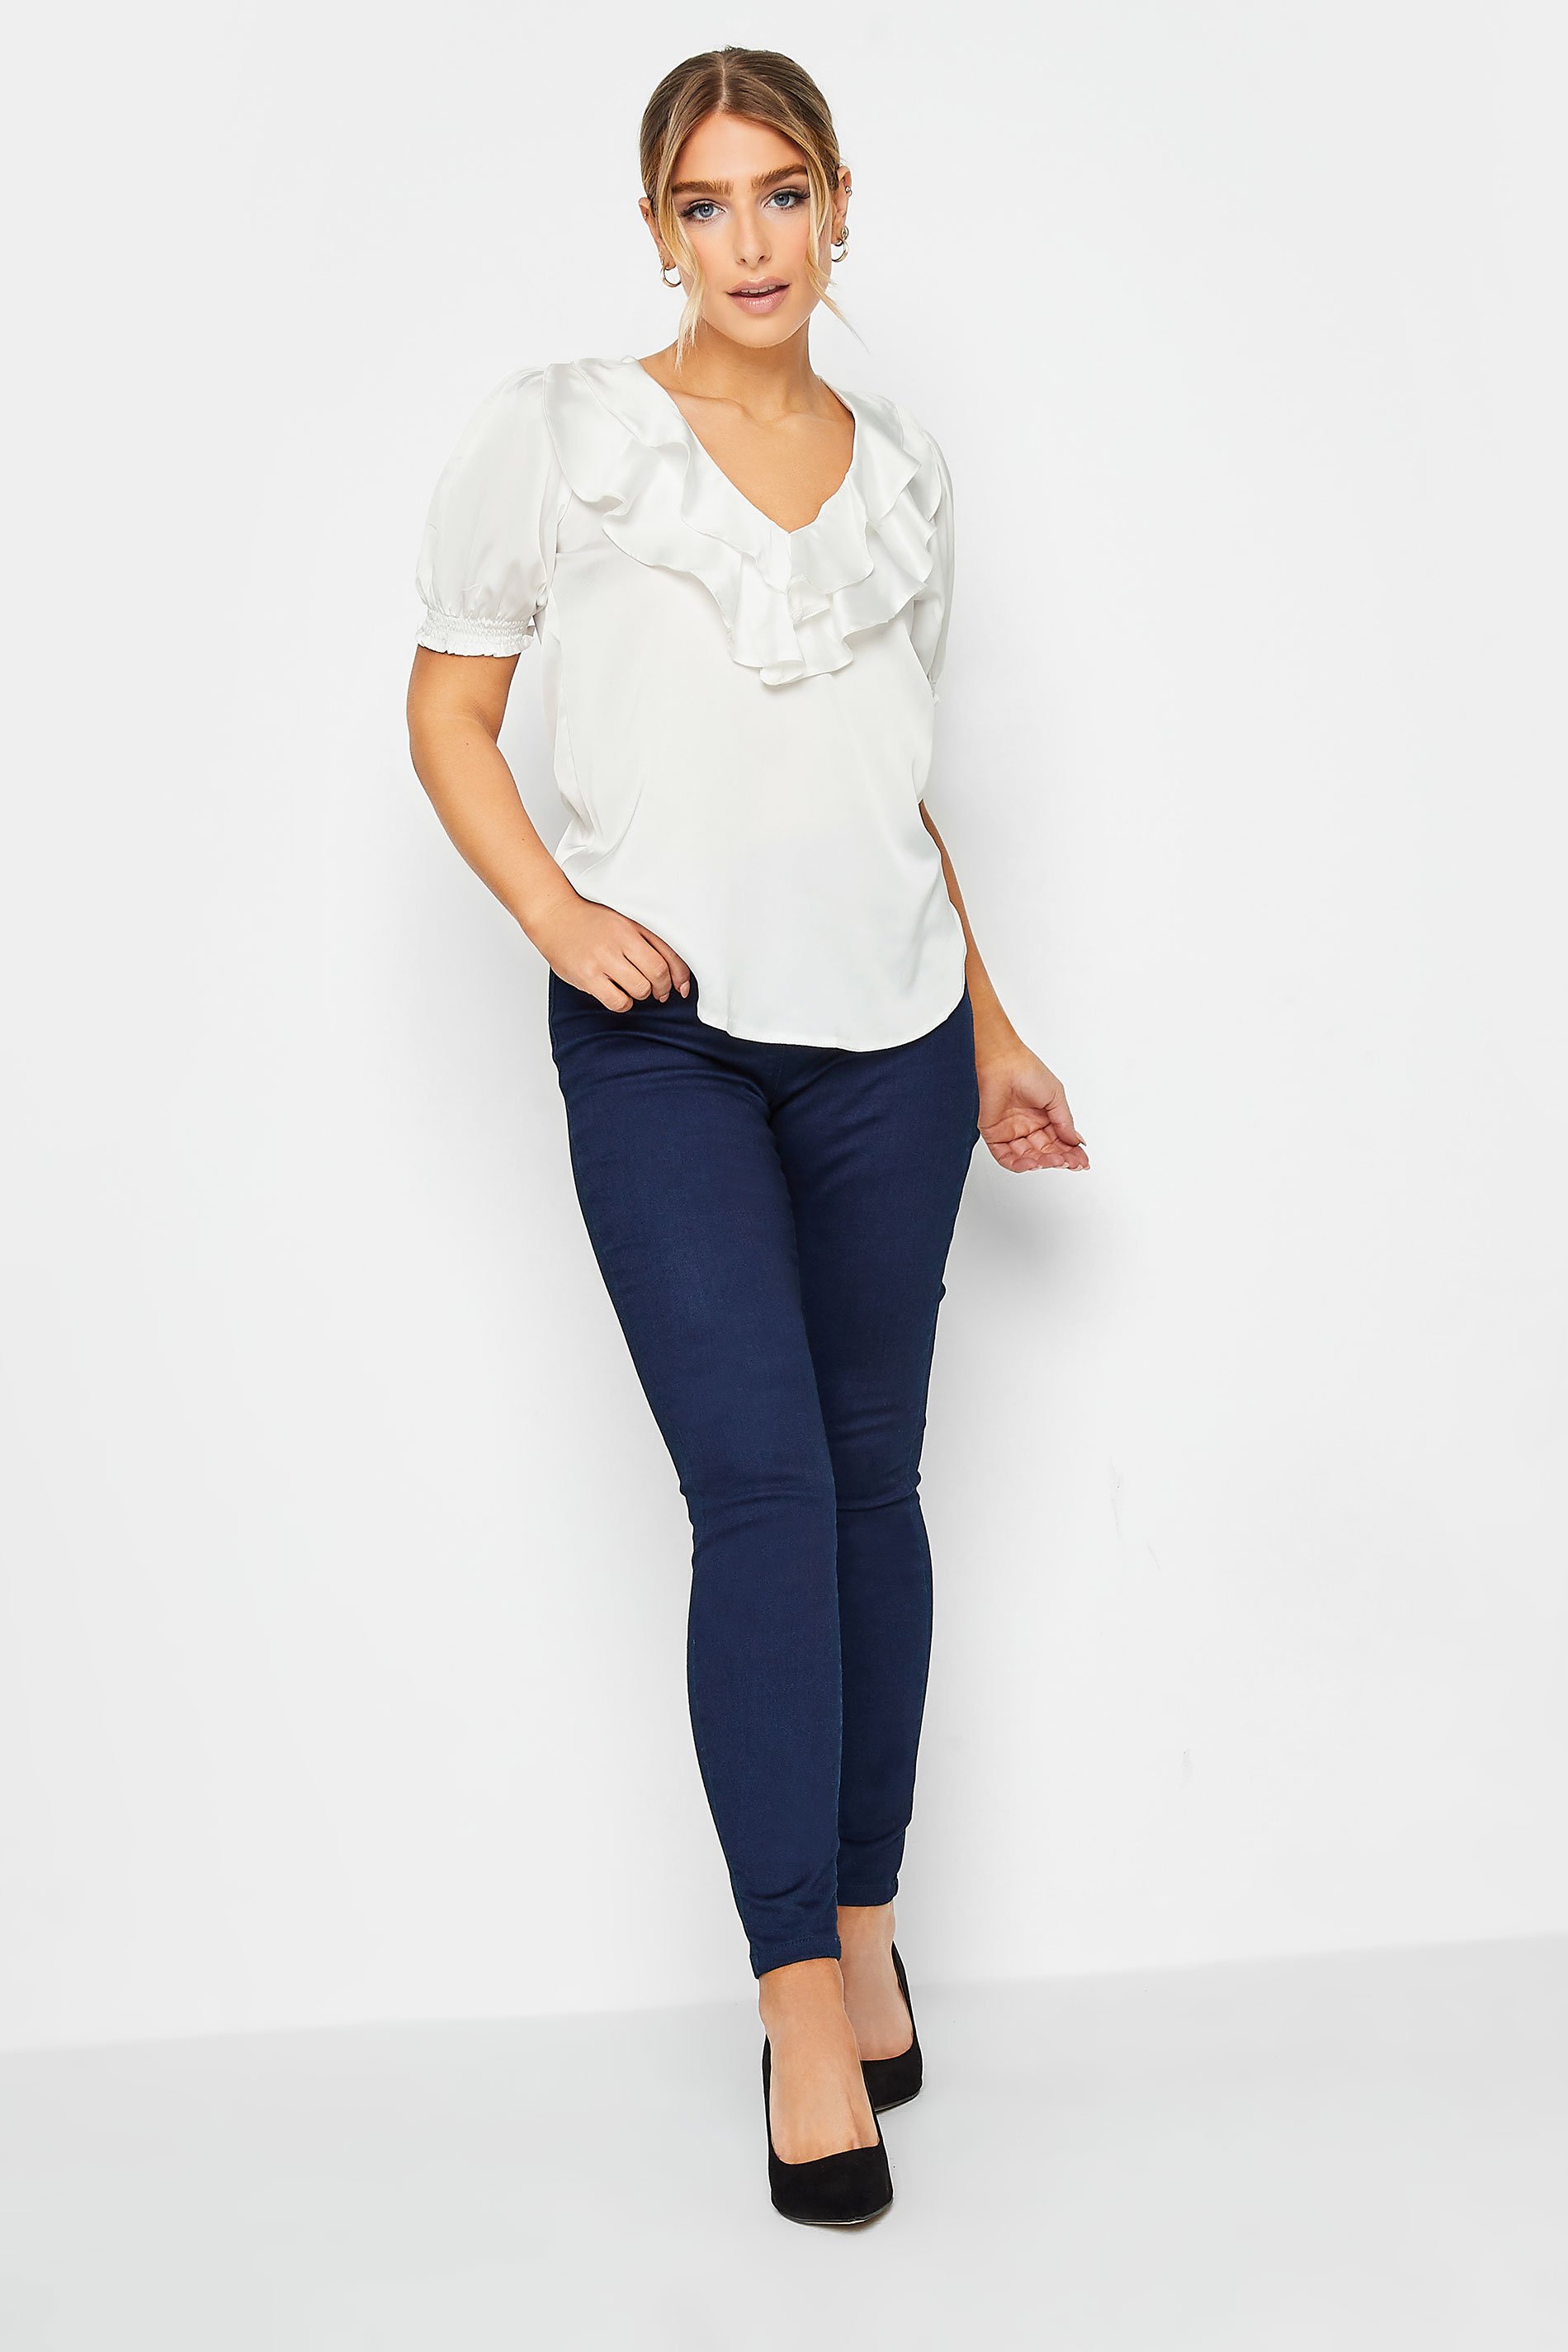 M&Co White Frill Front Blouse | M&Co 2